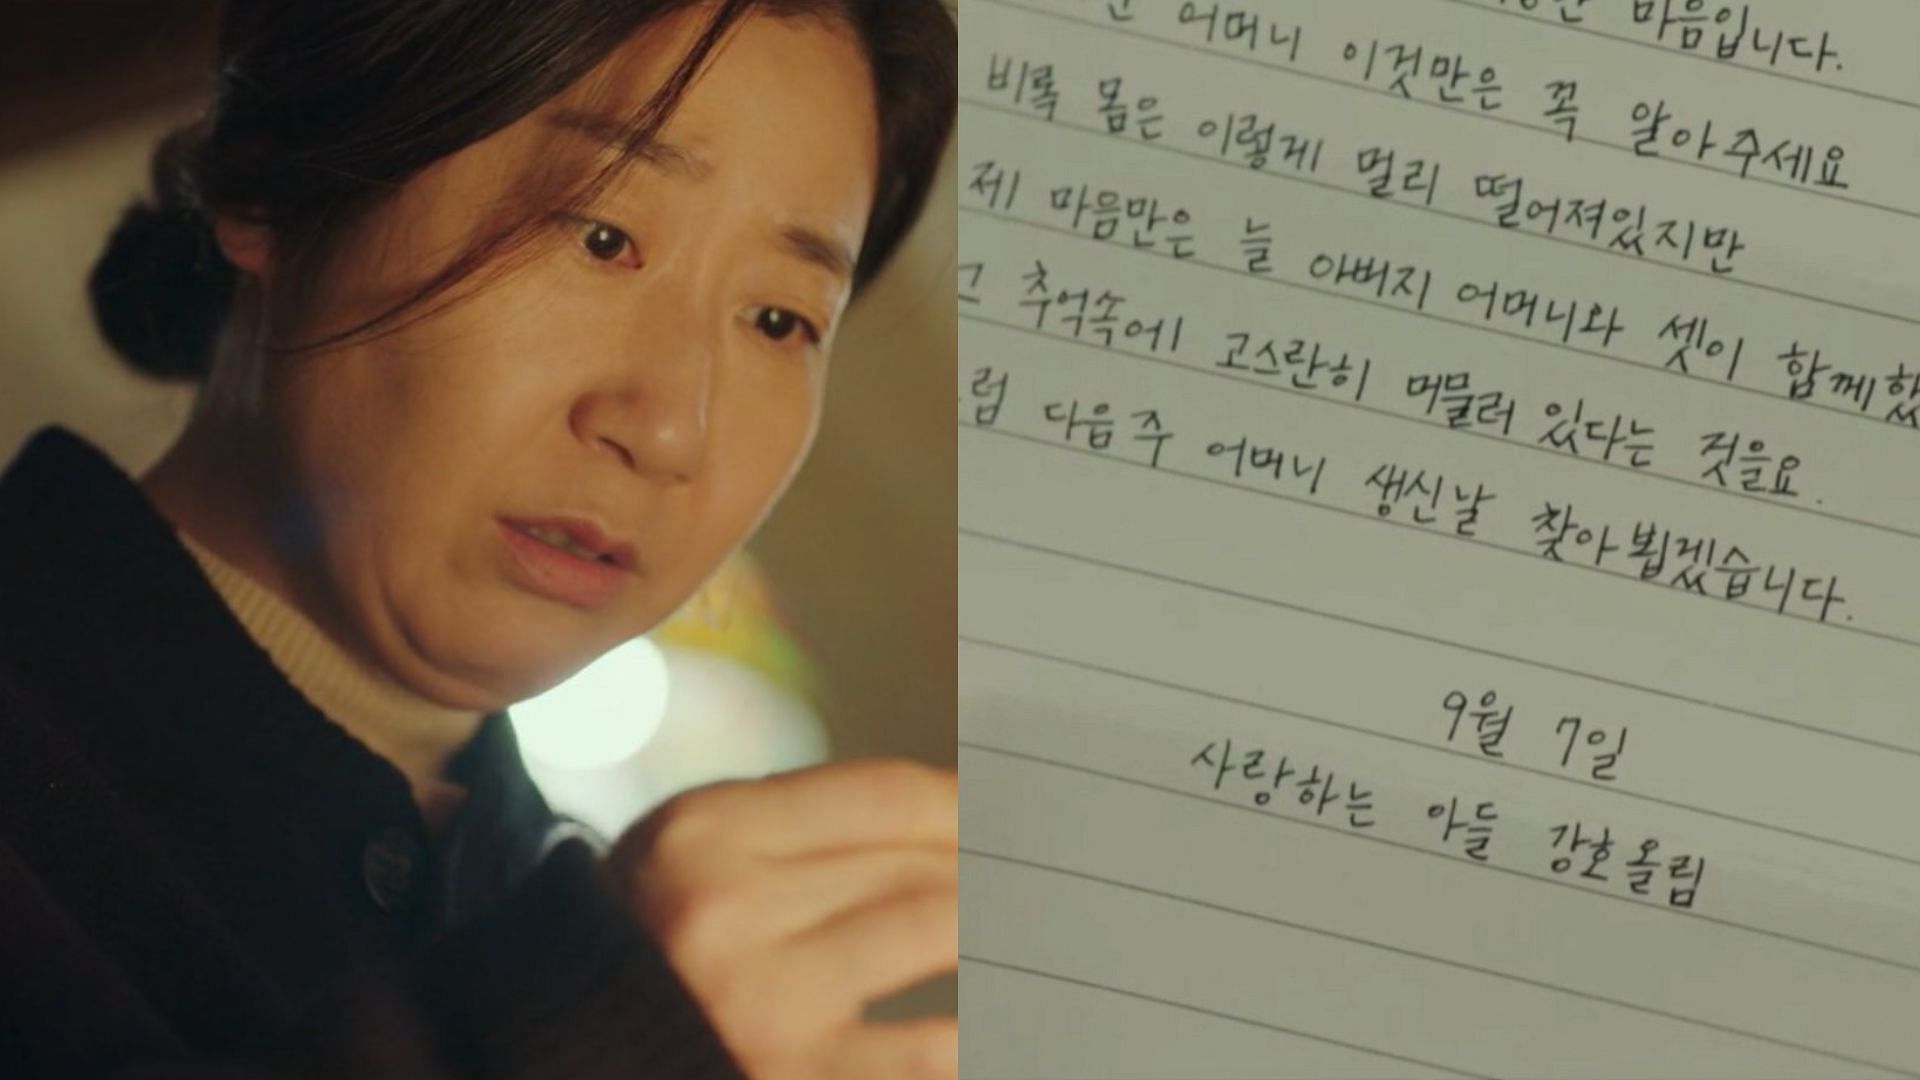 Ra Mi-ran finds a suspicious evidence hidden by Lee Do-hyun in The Good Bad Mother episode 8 (Image via Twitter/blueskypallette and cumber_joonie)